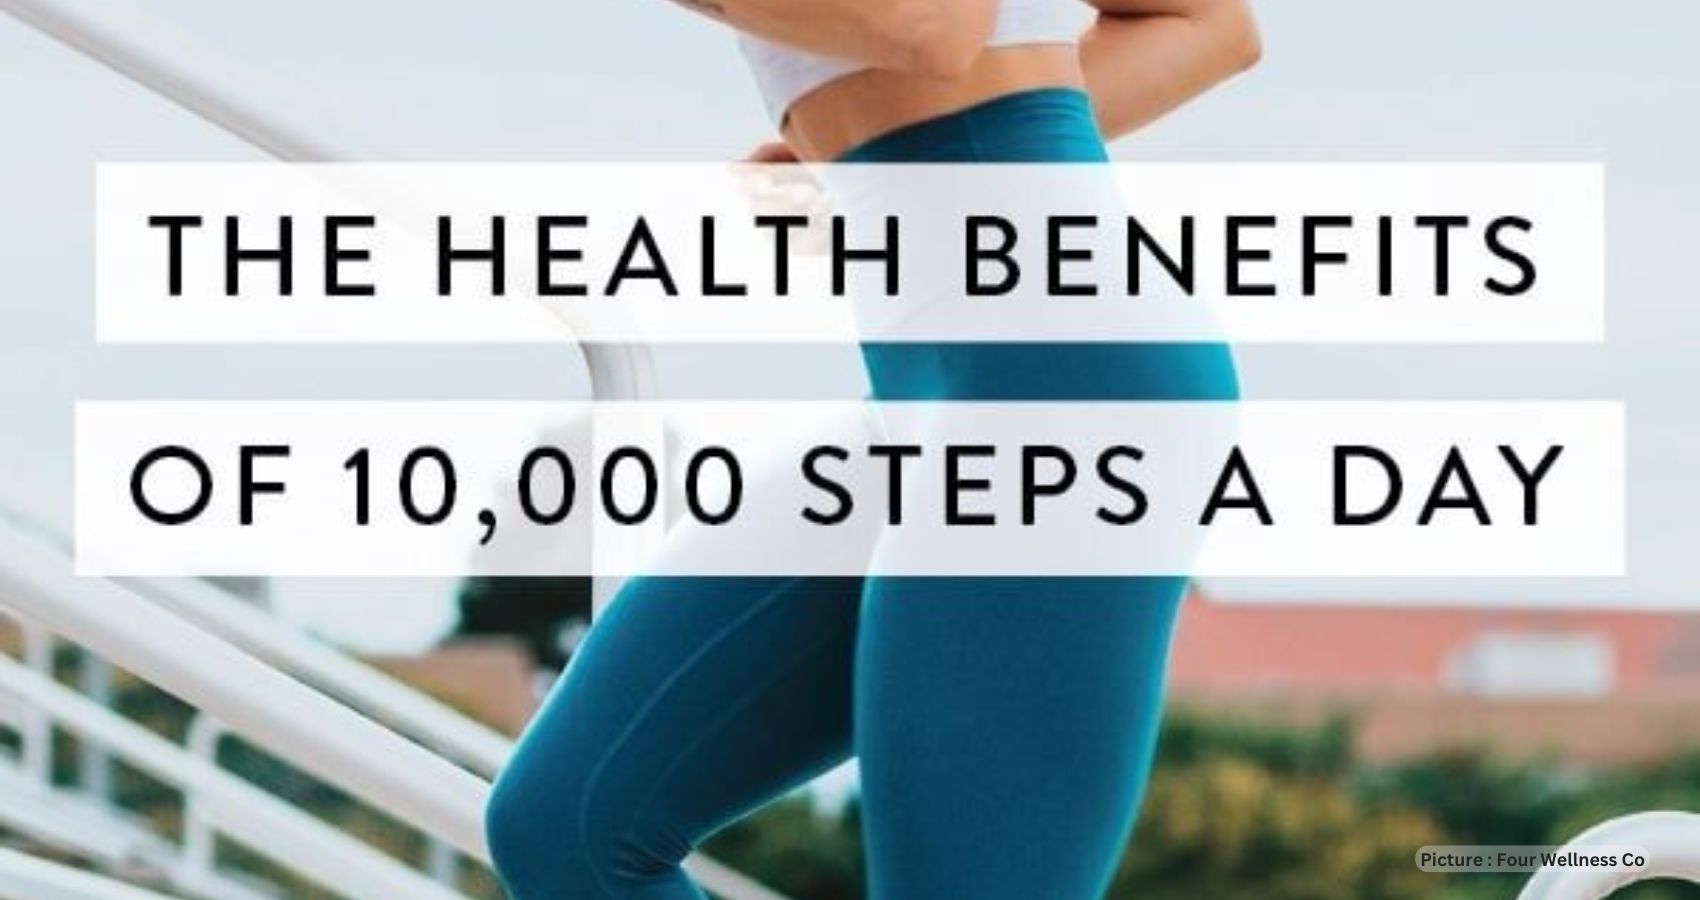 Forget 10,000 Steps. Here’s How Much Science Says You Actually Need to Walk